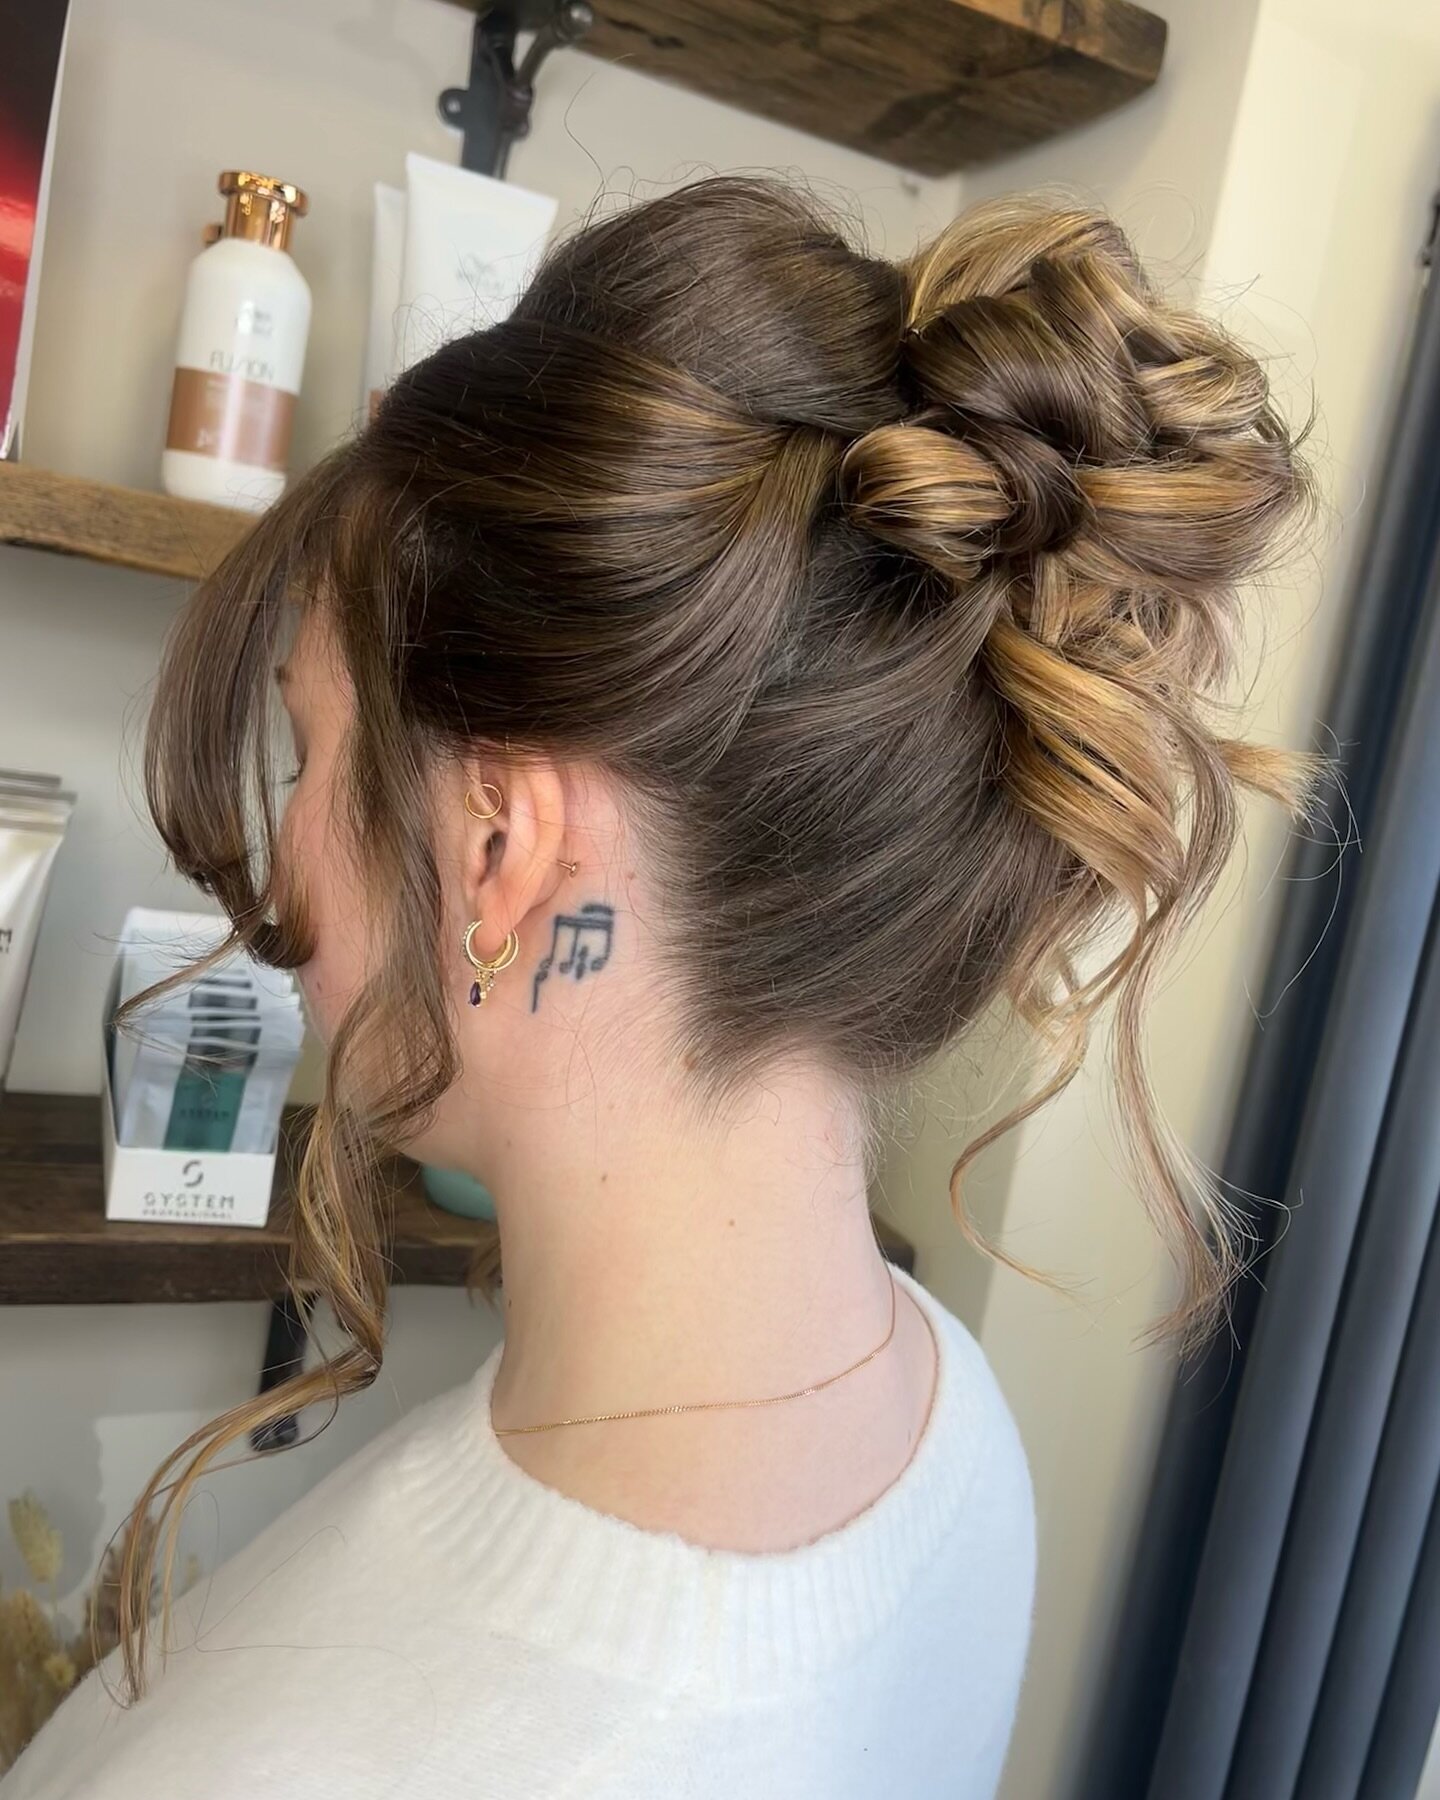 Pammy Vibes for this Awards Gala Look ✨✌🏼 
&bull;
&bull;
&bull;
#eventshairstyling #horsleytowers #pammy #surreybridalhair #surreyhairstylist